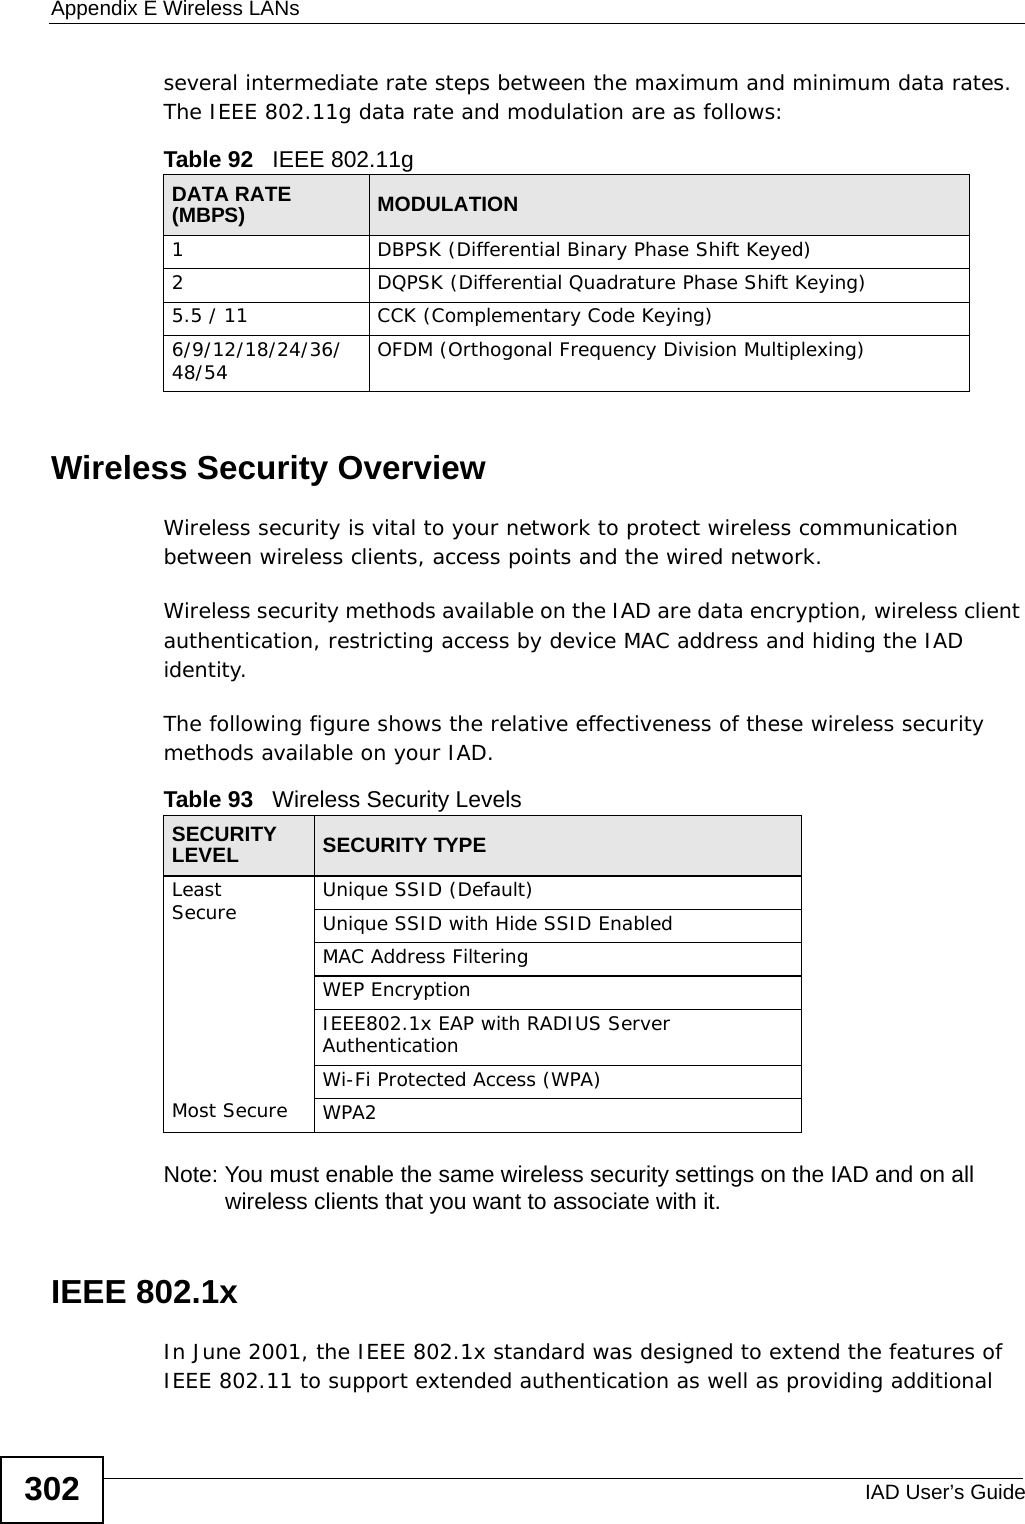 Appendix E Wireless LANsIAD User’s Guide302several intermediate rate steps between the maximum and minimum data rates. The IEEE 802.11g data rate and modulation are as follows:Wireless Security OverviewWireless security is vital to your network to protect wireless communication between wireless clients, access points and the wired network.Wireless security methods available on the IAD are data encryption, wireless client authentication, restricting access by device MAC address and hiding the IAD identity.The following figure shows the relative effectiveness of these wireless security methods available on your IAD.Note: You must enable the same wireless security settings on the IAD and on all wireless clients that you want to associate with it. IEEE 802.1xIn June 2001, the IEEE 802.1x standard was designed to extend the features of IEEE 802.11 to support extended authentication as well as providing additional Table 92   IEEE 802.11gDATA RATE (MBPS) MODULATION1 DBPSK (Differential Binary Phase Shift Keyed)2 DQPSK (Differential Quadrature Phase Shift Keying)5.5 / 11 CCK (Complementary Code Keying) 6/9/12/18/24/36/48/54 OFDM (Orthogonal Frequency Division Multiplexing) Table 93   Wireless Security LevelsSECURITY LEVEL SECURITY TYPELeast       Secure                                                                                Most SecureUnique SSID (Default)Unique SSID with Hide SSID EnabledMAC Address FilteringWEP EncryptionIEEE802.1x EAP with RADIUS Server AuthenticationWi-Fi Protected Access (WPA)WPA2